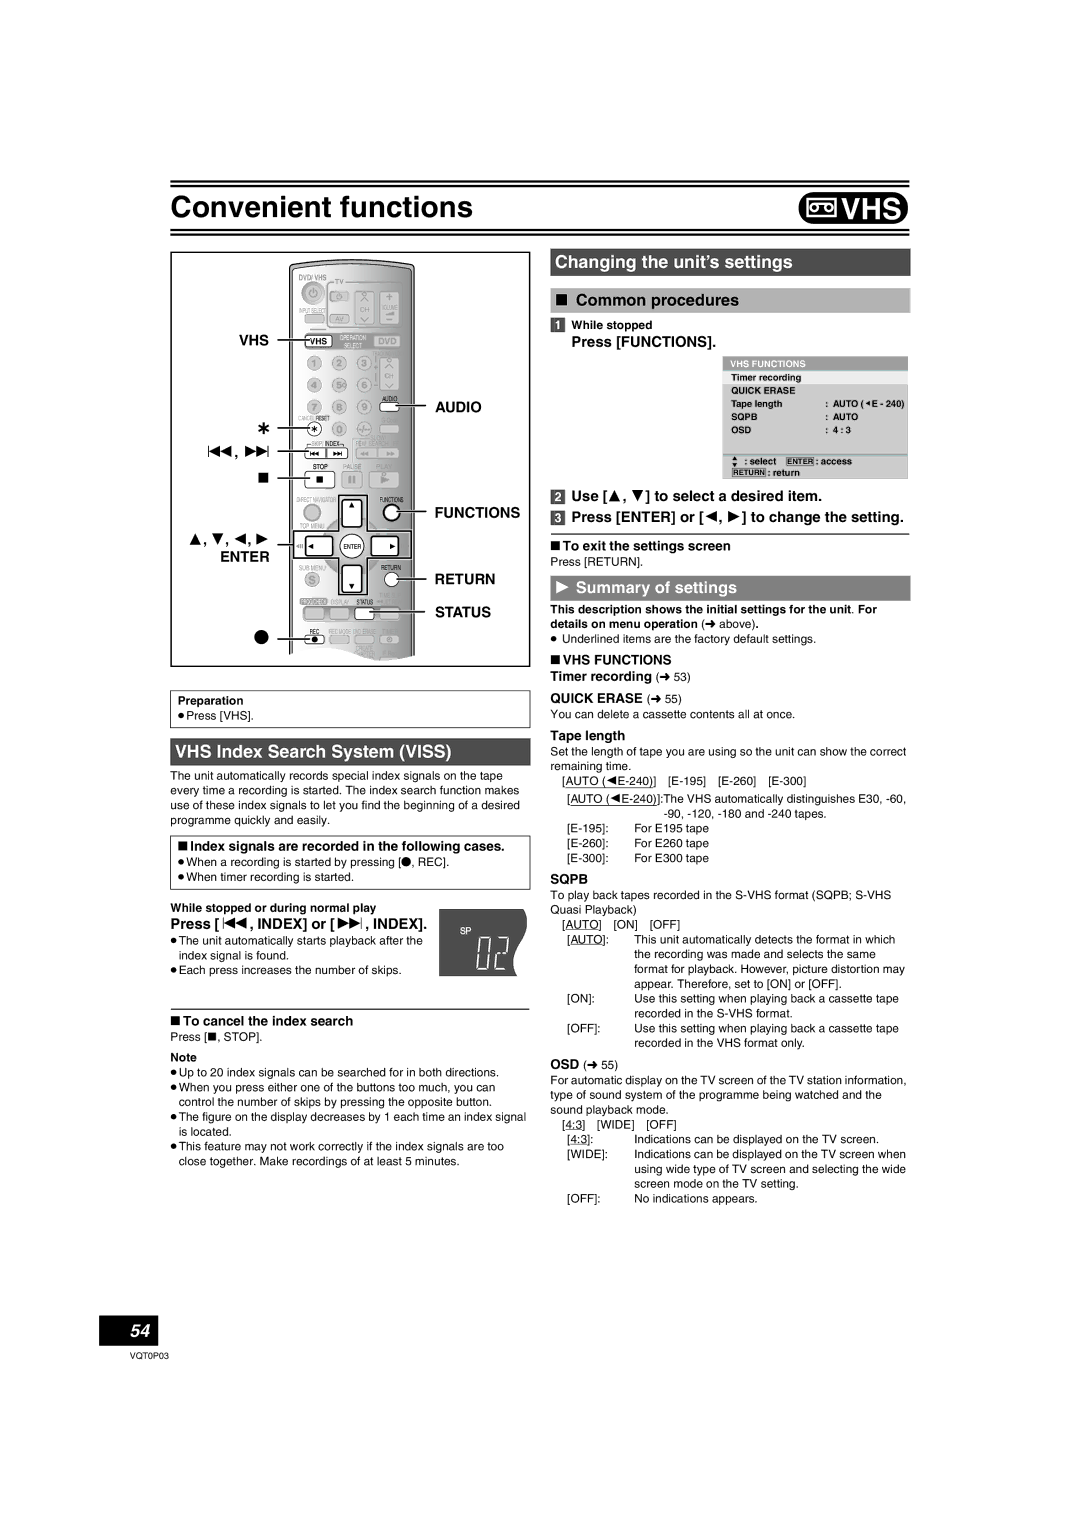 Panasonic DMR-ES30V operating instructions VHS Index Search System Viss, Summary of settings, Press , Index or 9, Index 